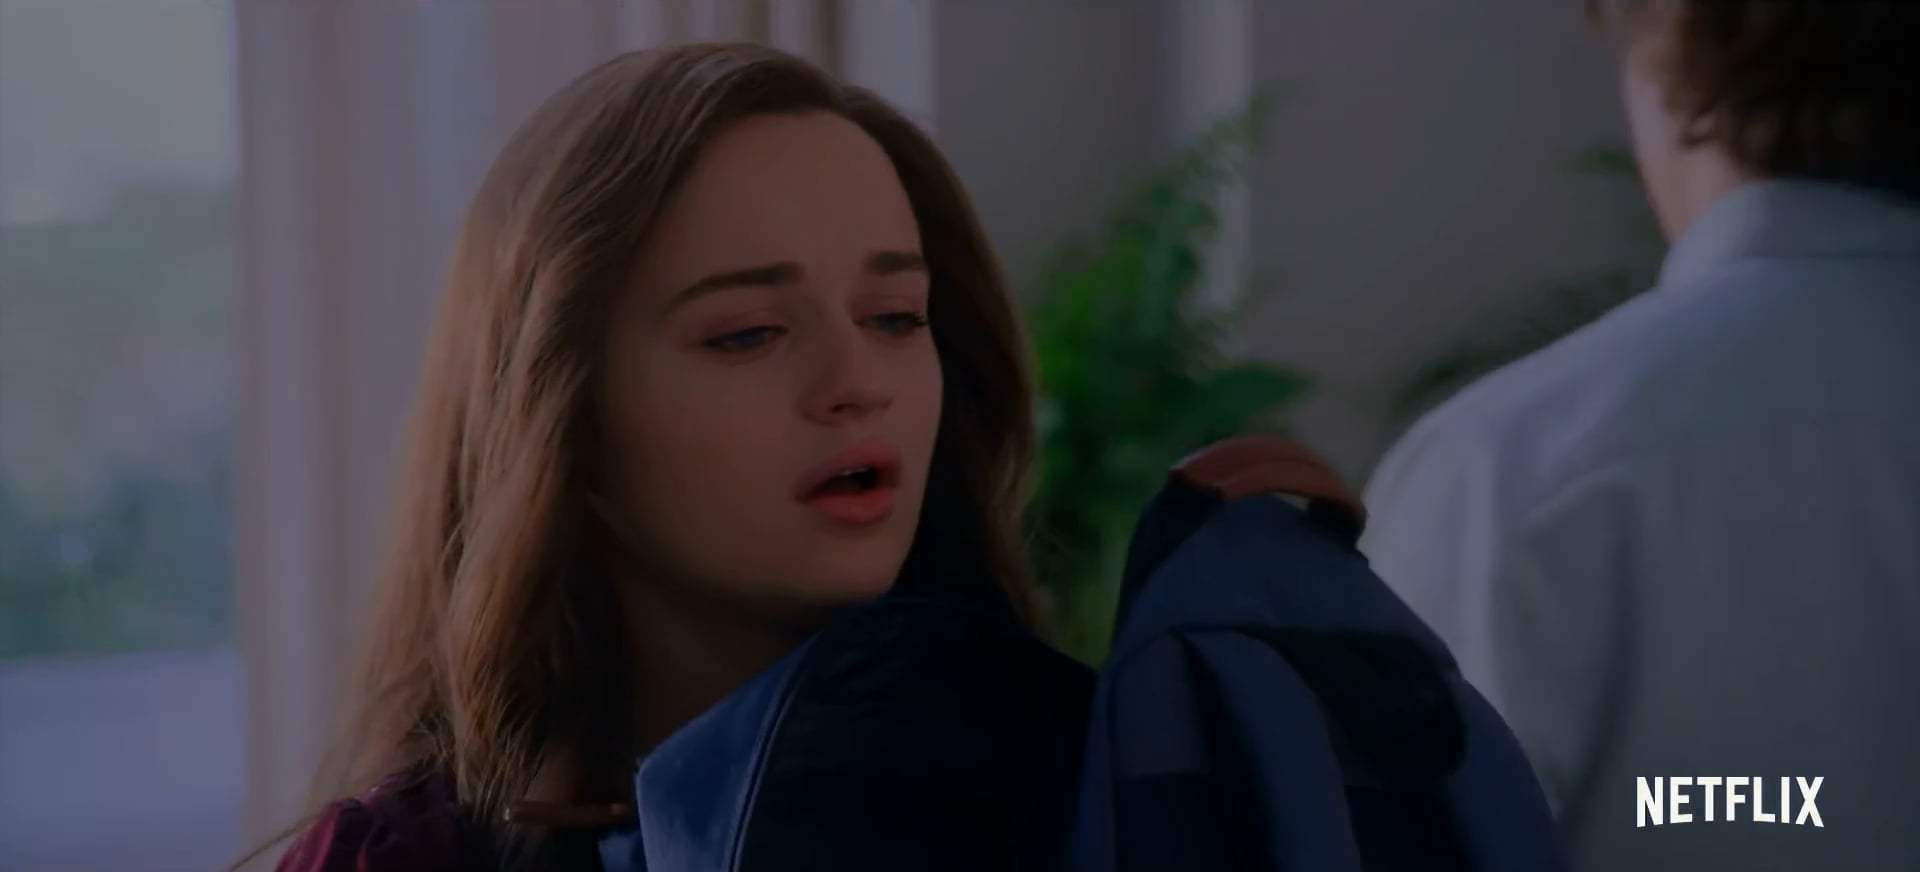 The Kissing Booth 2 Trailer (2020) Screen Capture #4